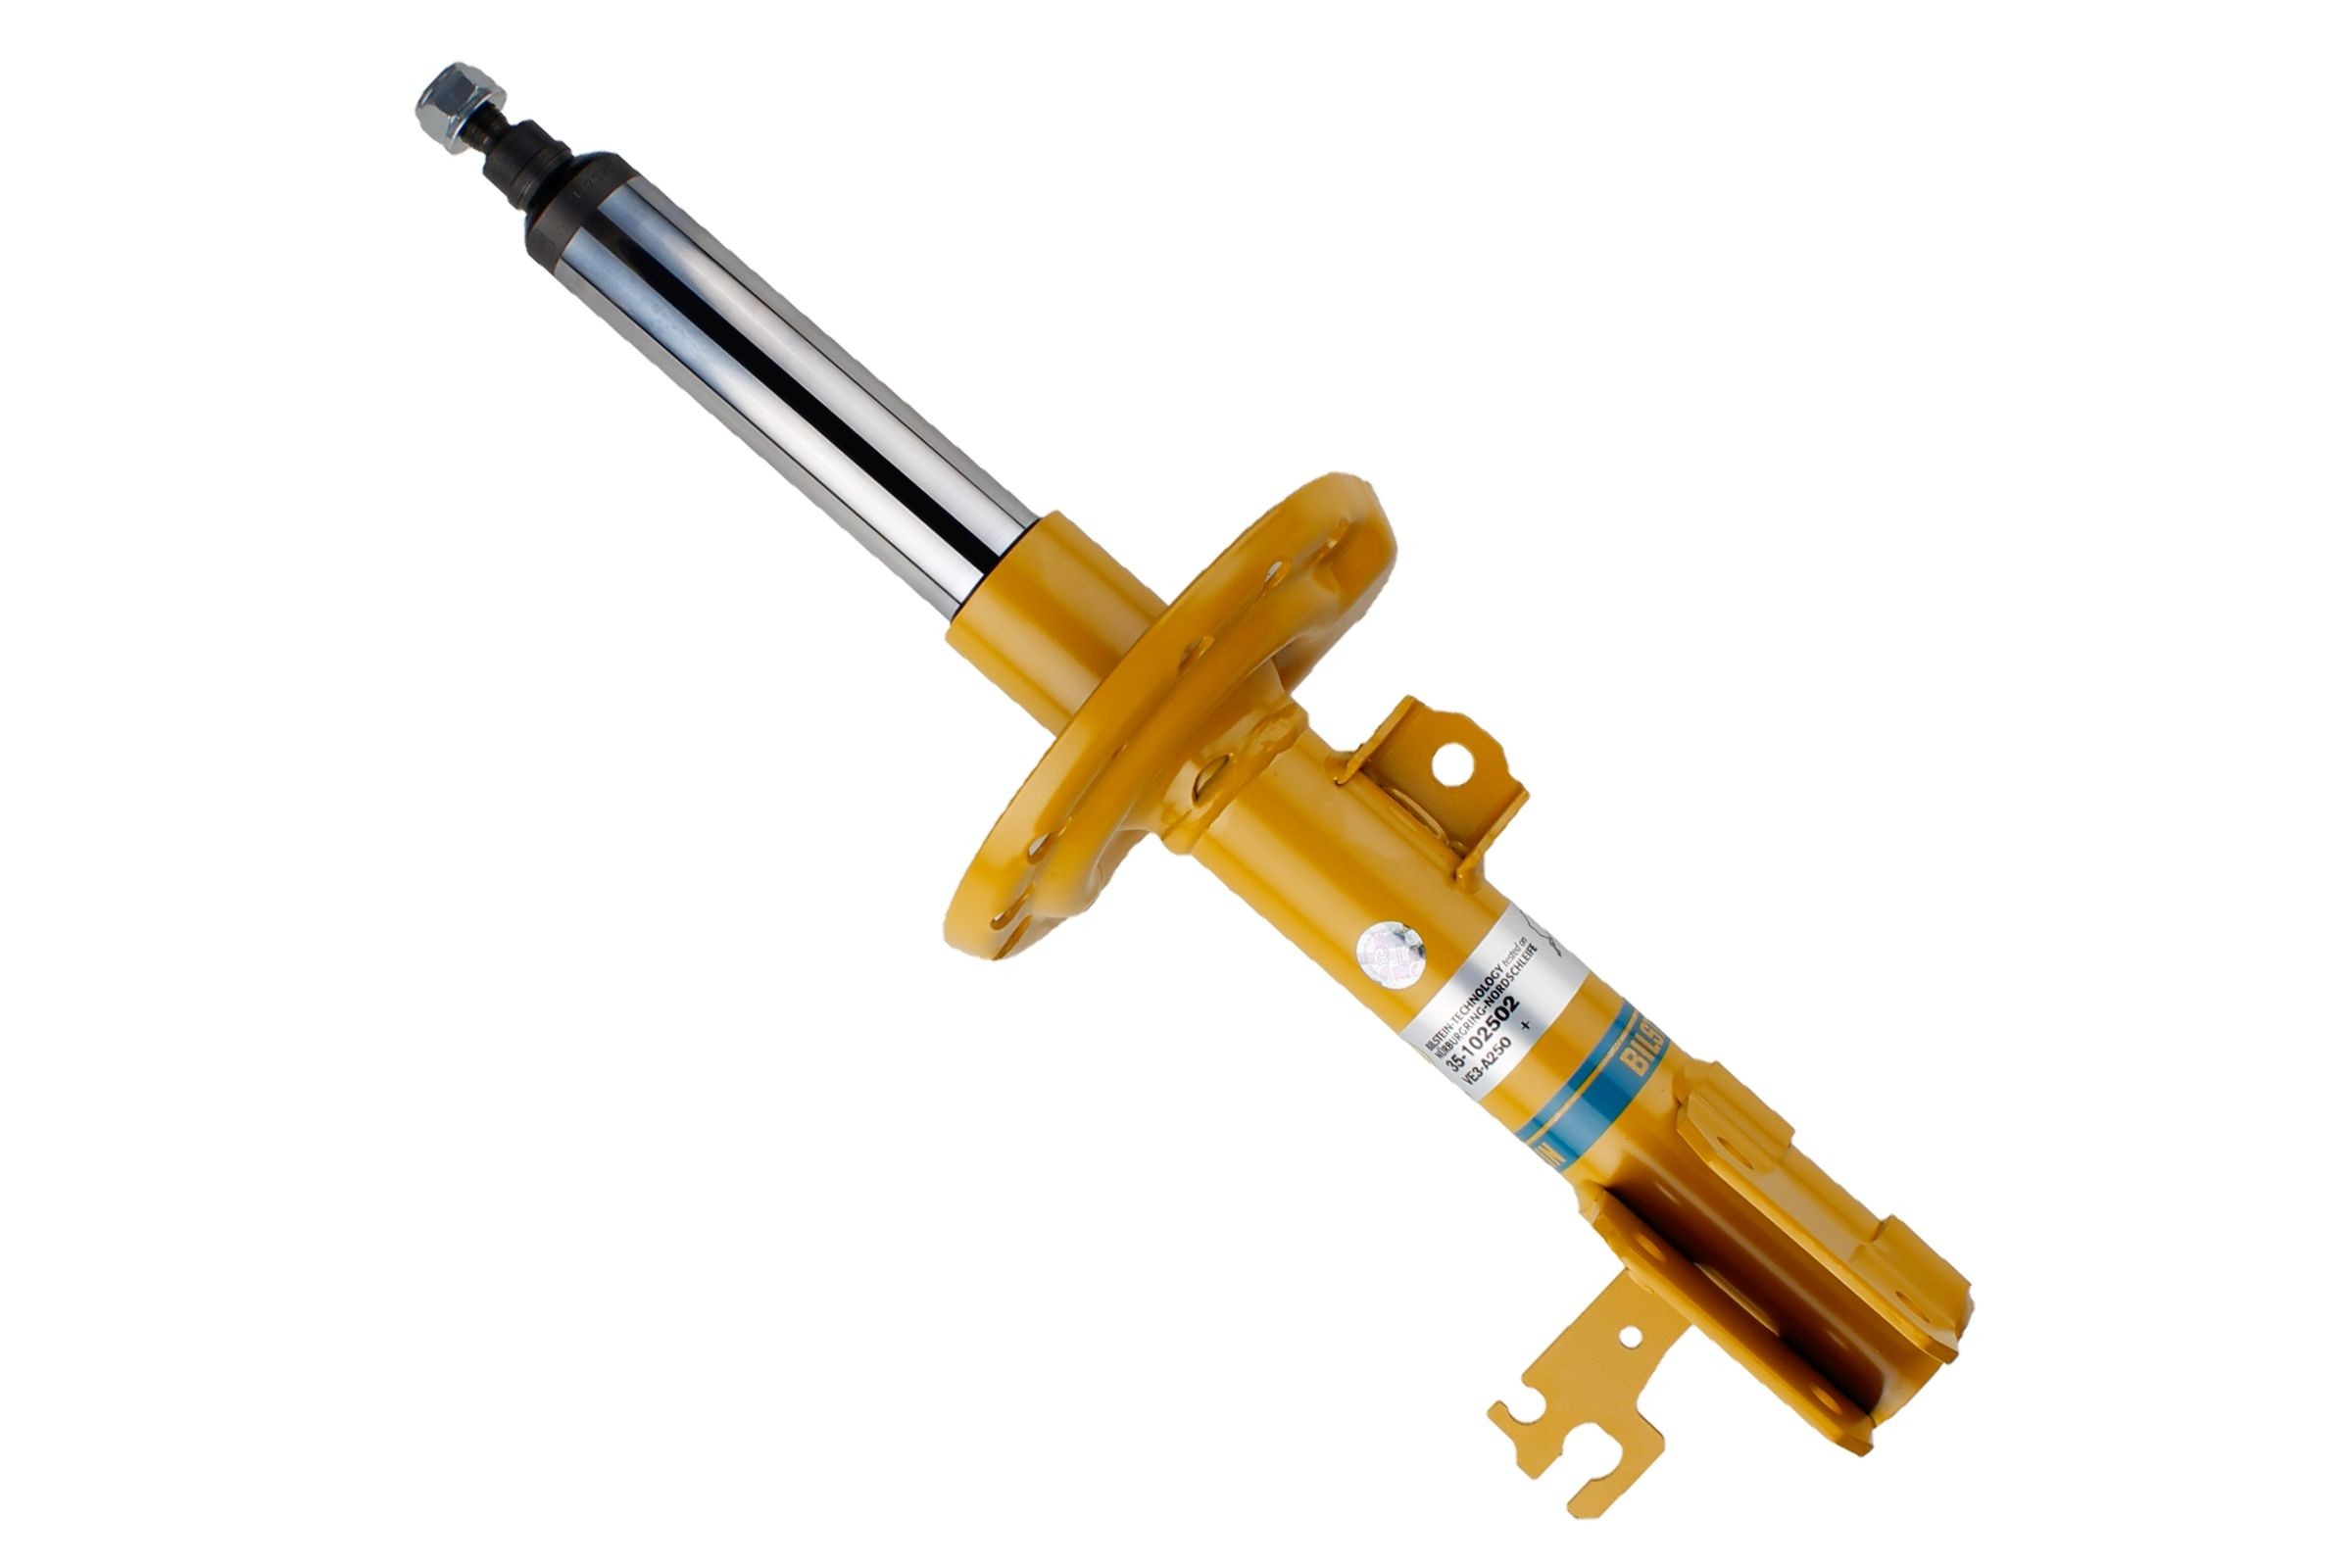 35-102502 BILSTEIN Shock absorbers SAAB Front Axle Left, Gas Pressure, Single Tube Upside Down, Suspension Strut, Top pin, Bottom Clamp